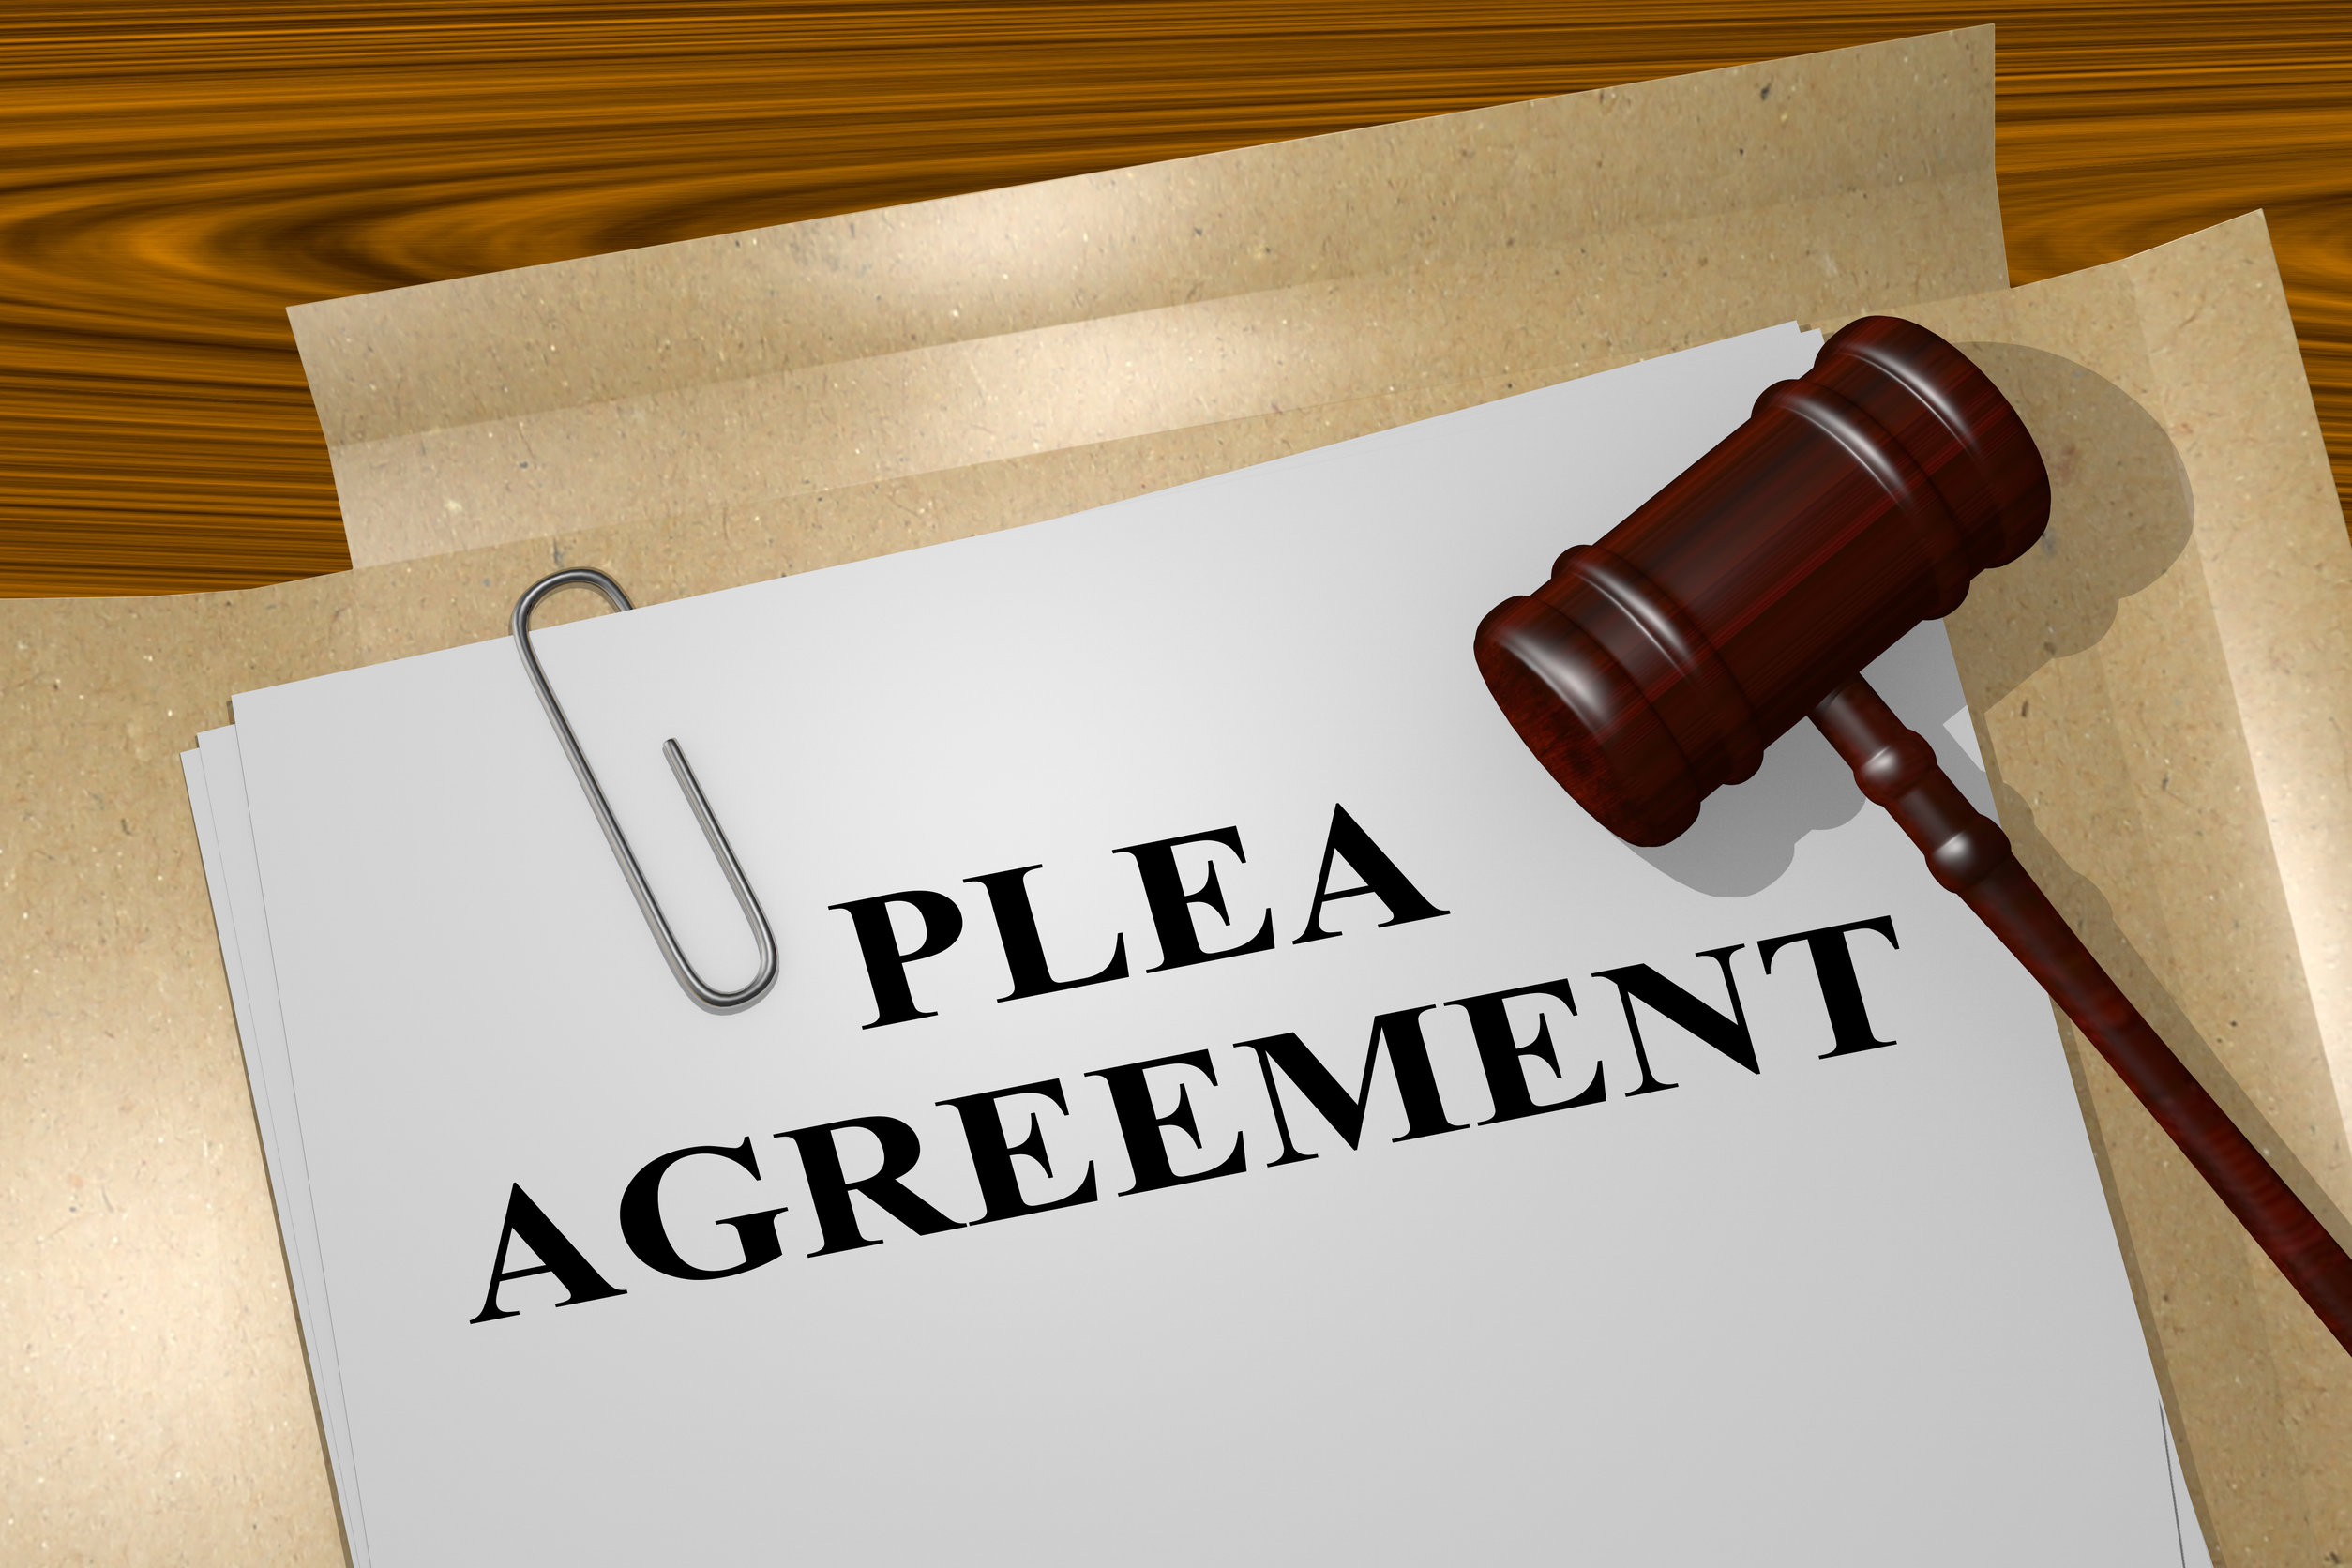 Can I Withdraw My Guilty Plea In Minnesota Appelman Law Firm